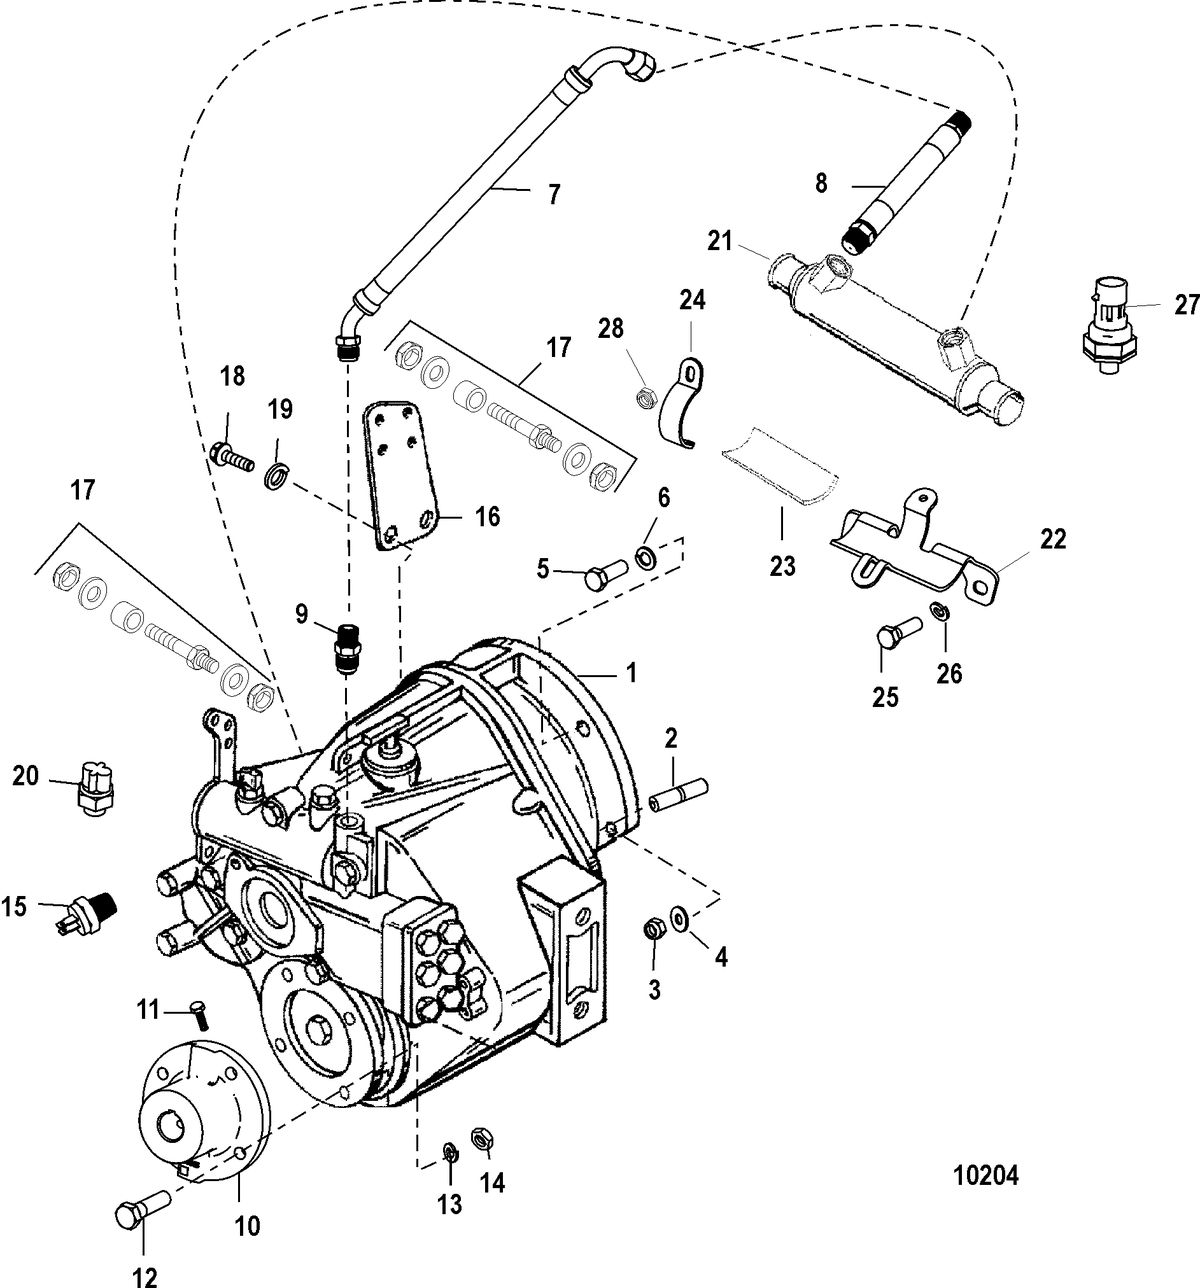 MERCRUISER 5.7/6.2L MPI INBOARD Transmission and Related Parts(BORG-WARNER 5000)